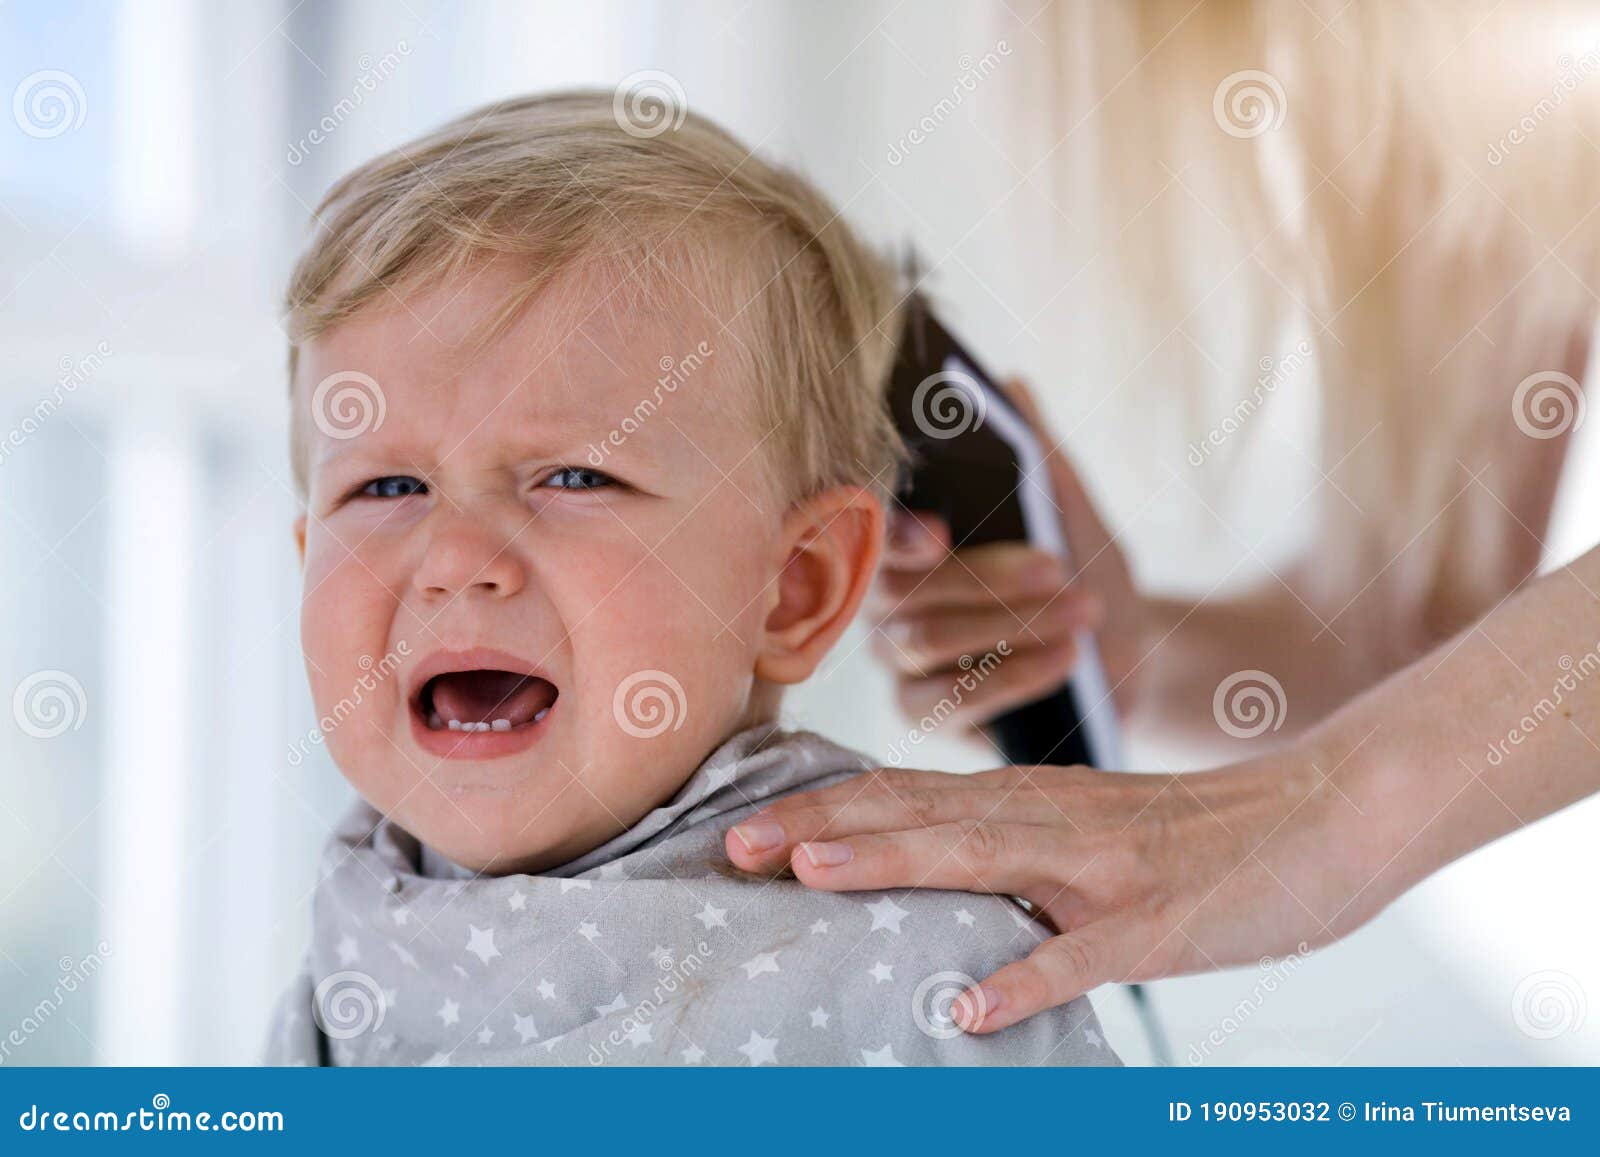 Female Hands Trim a Crying Baby with an Electric Hair Clipper in a  Hairdresser. First Haircut Stock Photo - Image of nipple, baby: 190953032